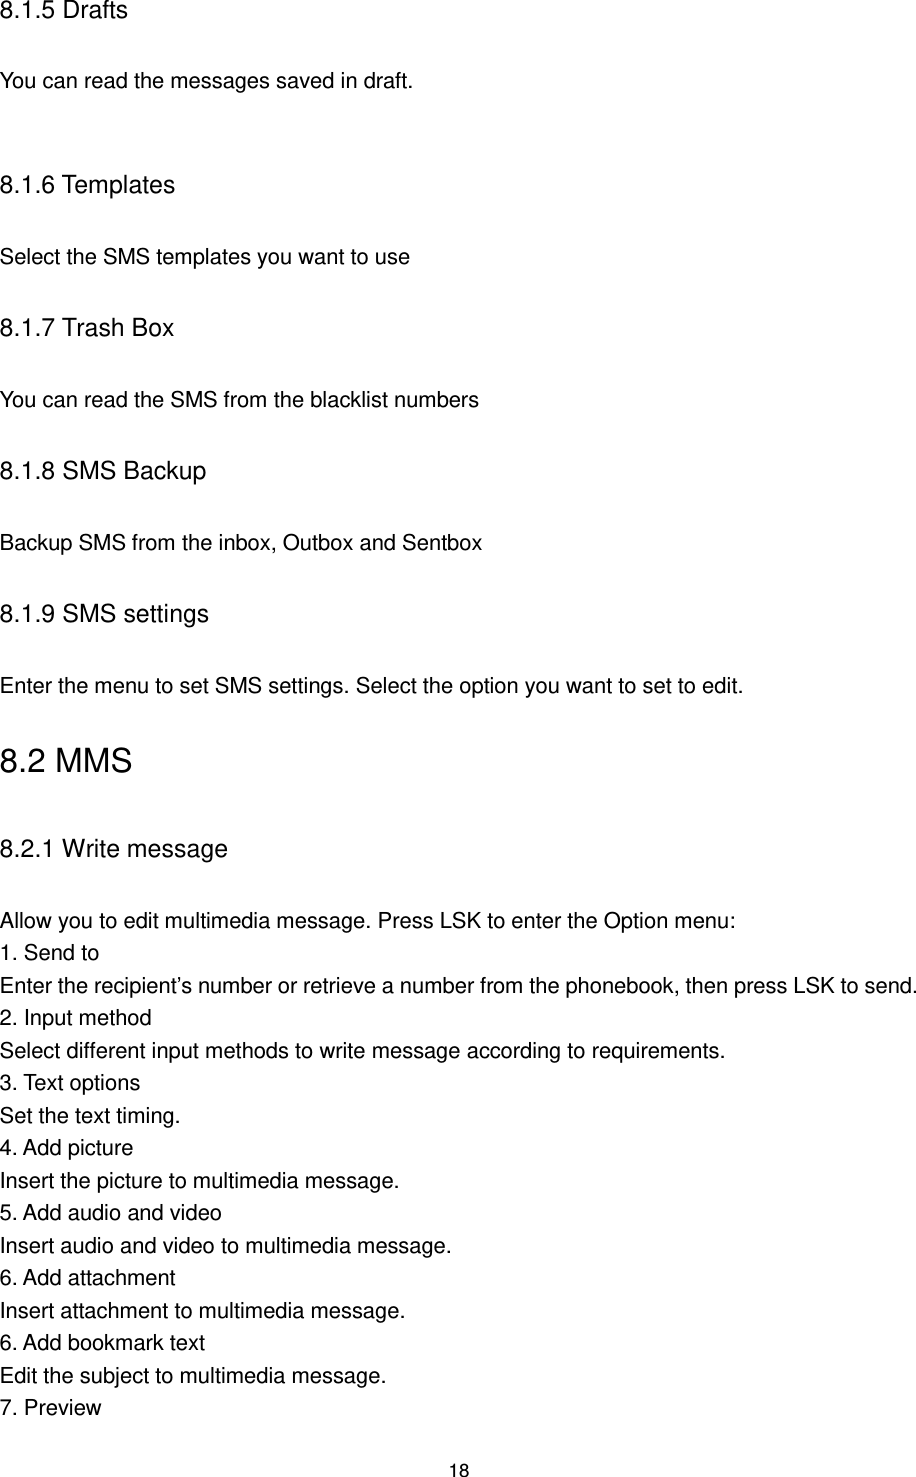 18 8.1.5 Drafts You can read the messages saved in draft.  8.1.6 Templates Select the SMS templates you want to use 8.1.7 Trash Box You can read the SMS from the blacklist numbers 8.1.8 SMS Backup Backup SMS from the inbox, Outbox and Sentbox   8.1.9 SMS settings Enter the menu to set SMS settings. Select the option you want to set to edit. 8.2 MMS 8.2.1 Write message Allow you to edit multimedia message. Press LSK to enter the Option menu:   1. Send to Enter the recipient‟s number or retrieve a number from the phonebook, then press LSK to send. 2. Input method Select different input methods to write message according to requirements. 3. Text options Set the text timing. 4. Add picture Insert the picture to multimedia message. 5. Add audio and video Insert audio and video to multimedia message. 6. Add attachment Insert attachment to multimedia message. 6. Add bookmark text Edit the subject to multimedia message. 7. Preview   